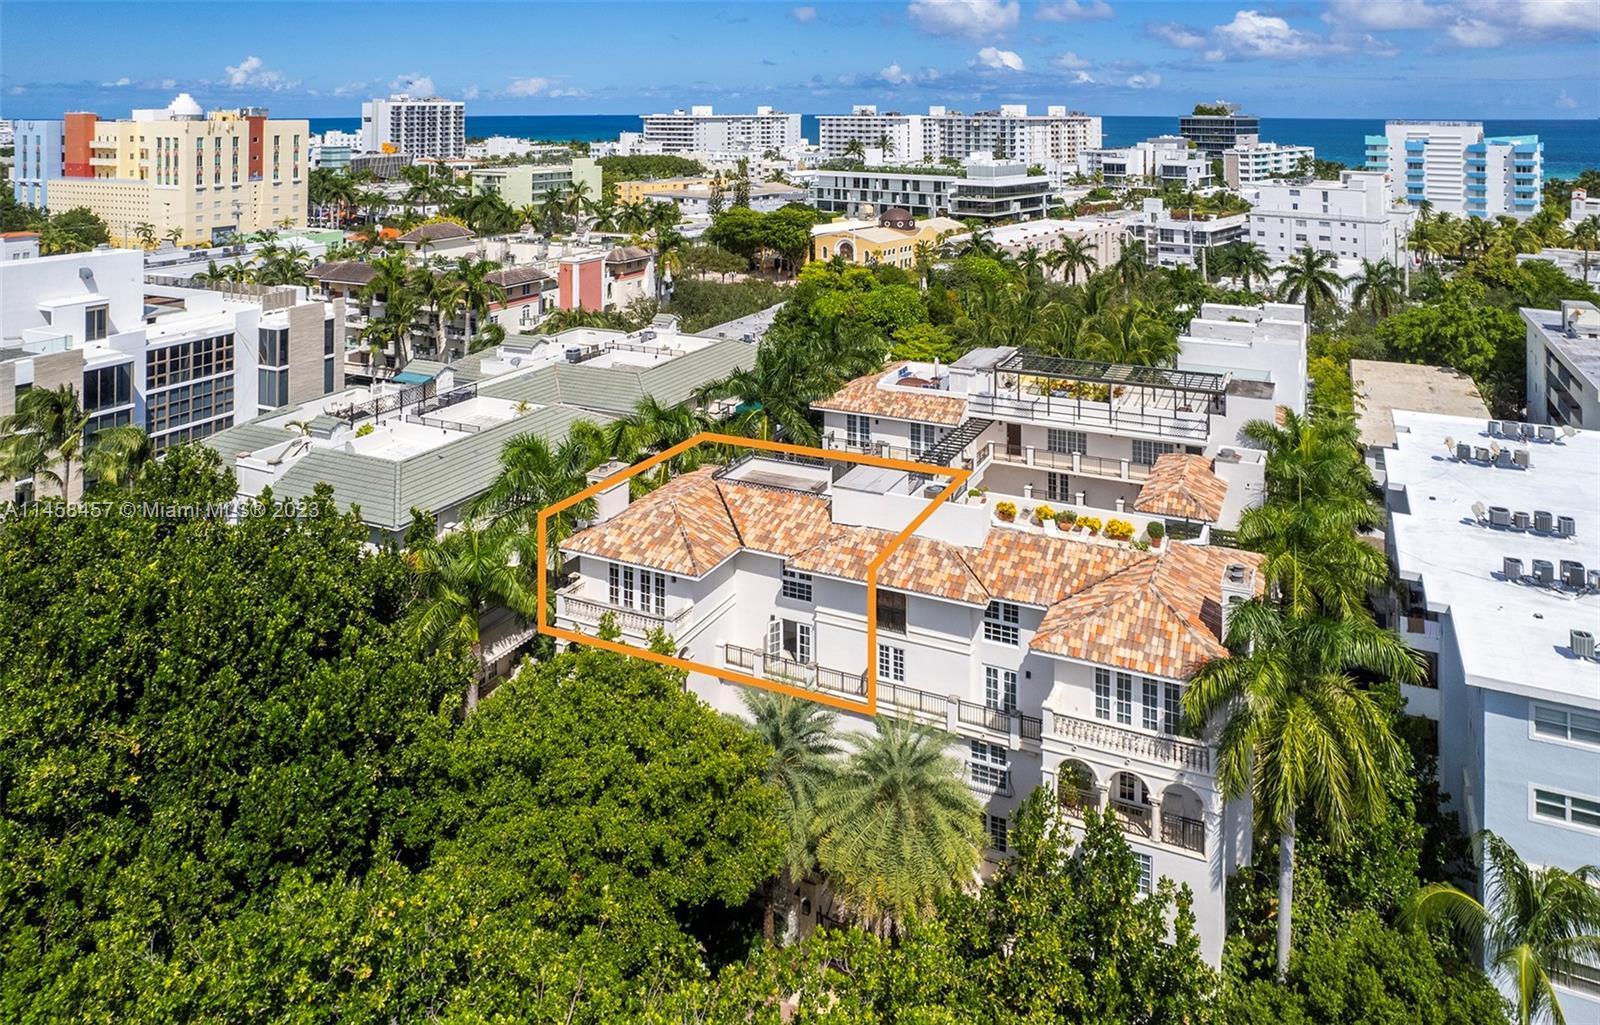 Rarely available 3 bedroom 2.5 bathroom in the most sought-after neighborhood in Miami Beach - South